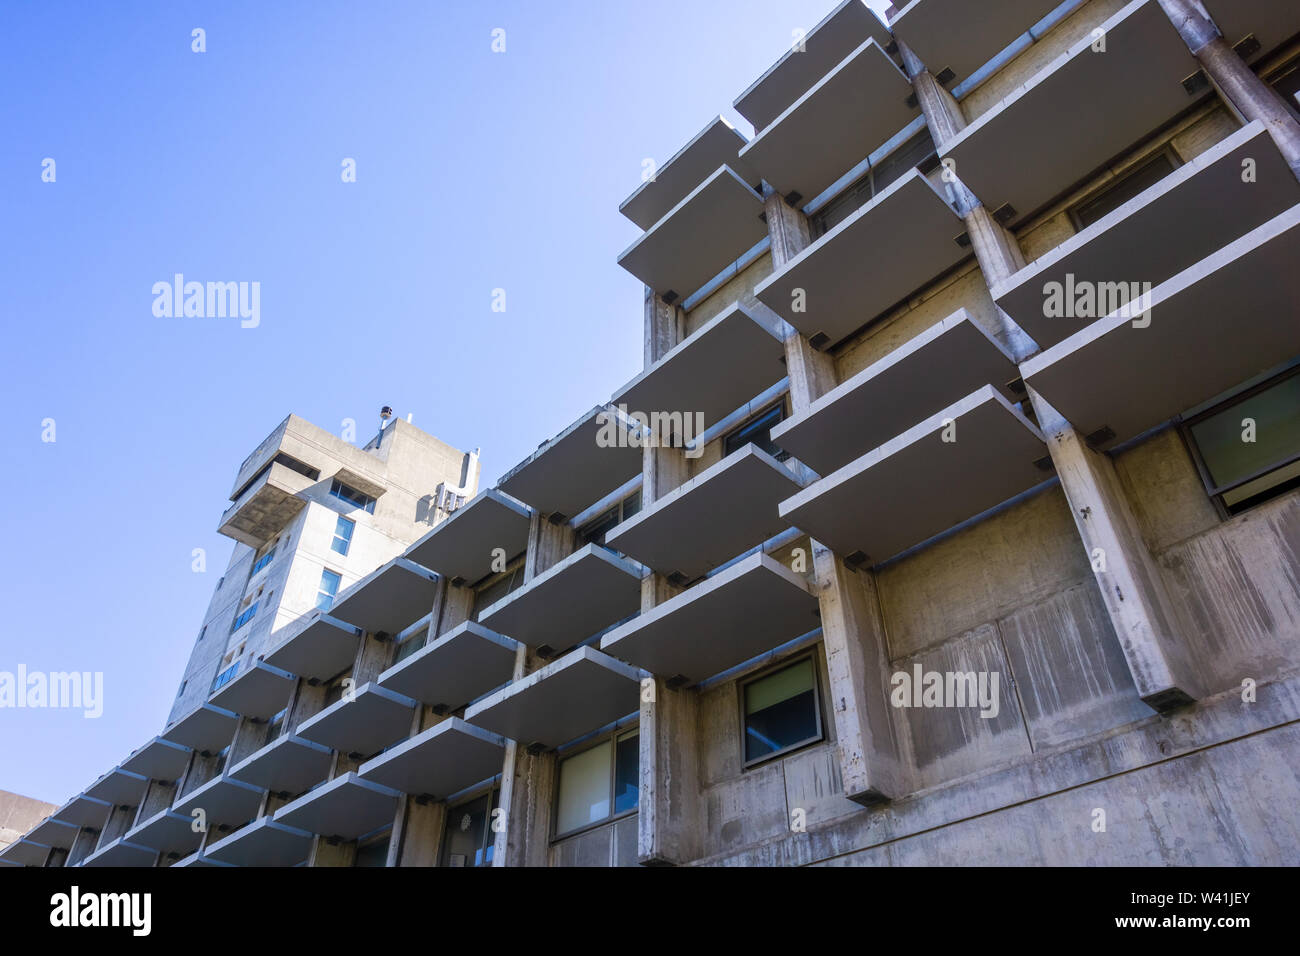 July 13, 2019 Berkeley / CA / USA - Wurster Hall, home of the renowned College of Environmental Design at University of California, Berkeley, built in Stock Photo